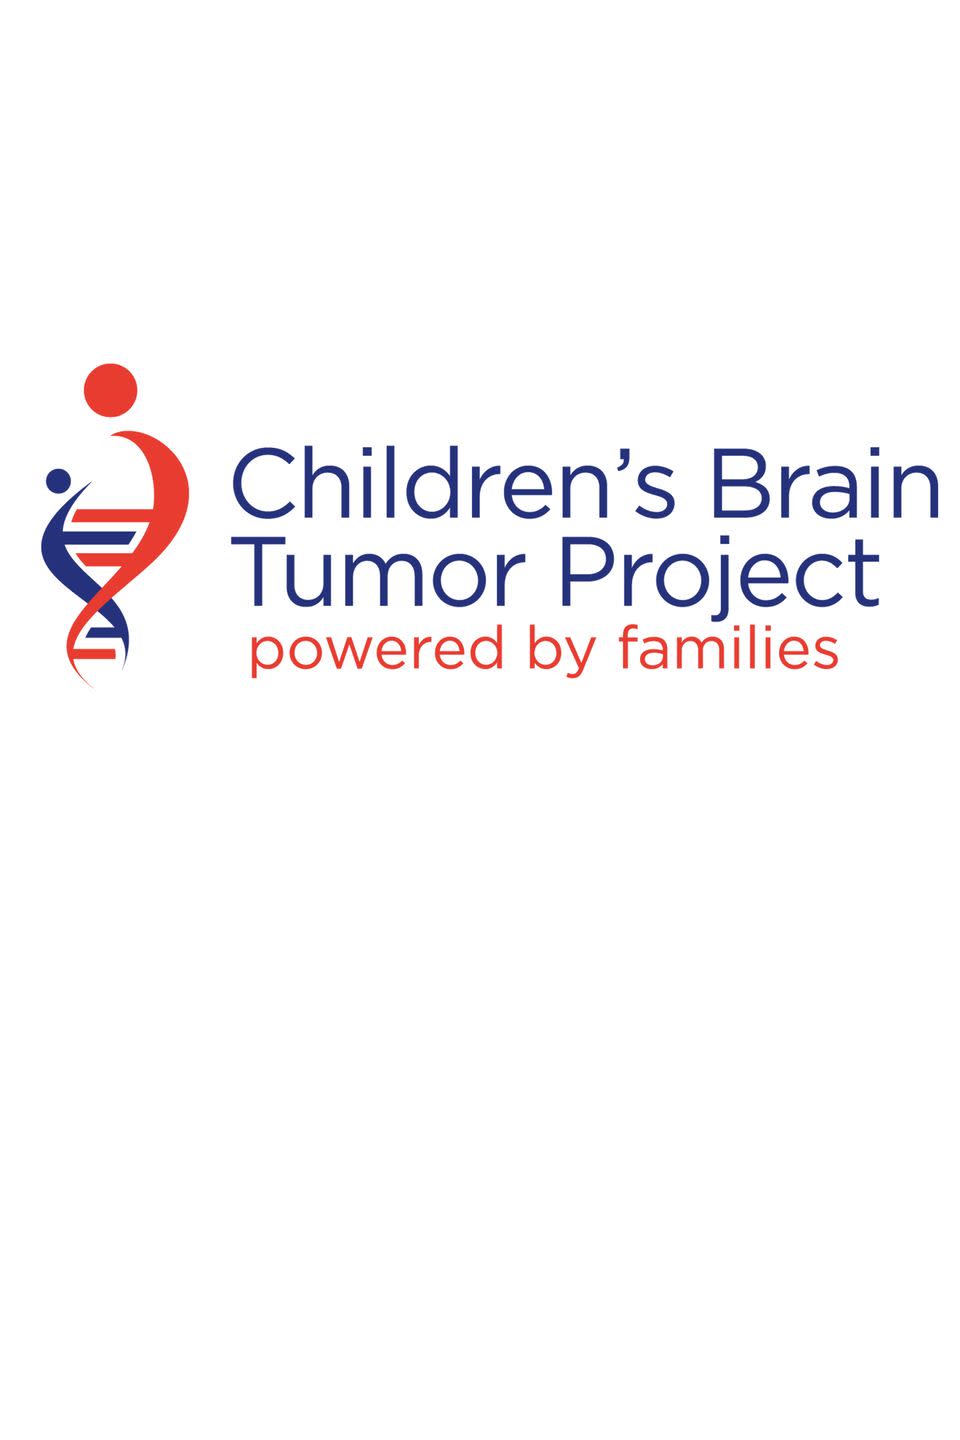 Elizabeth’s Hope and The Children’s Brain Tumor Project